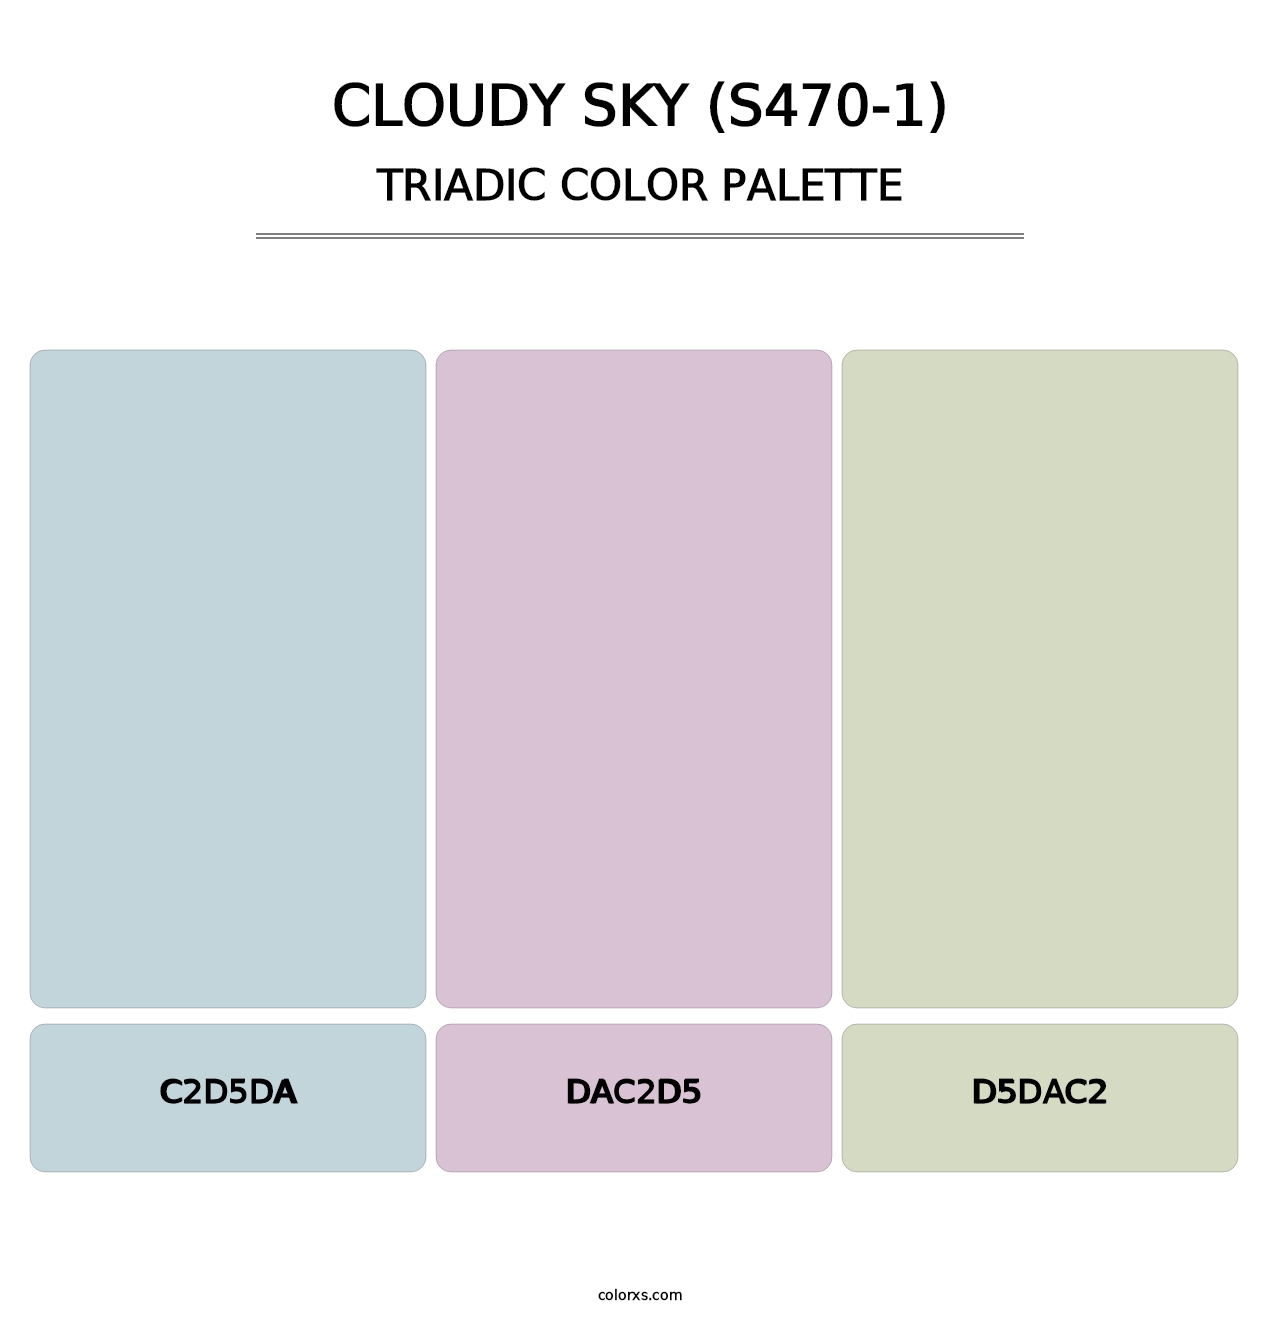 Cloudy Sky (S470-1) - Triadic Color Palette